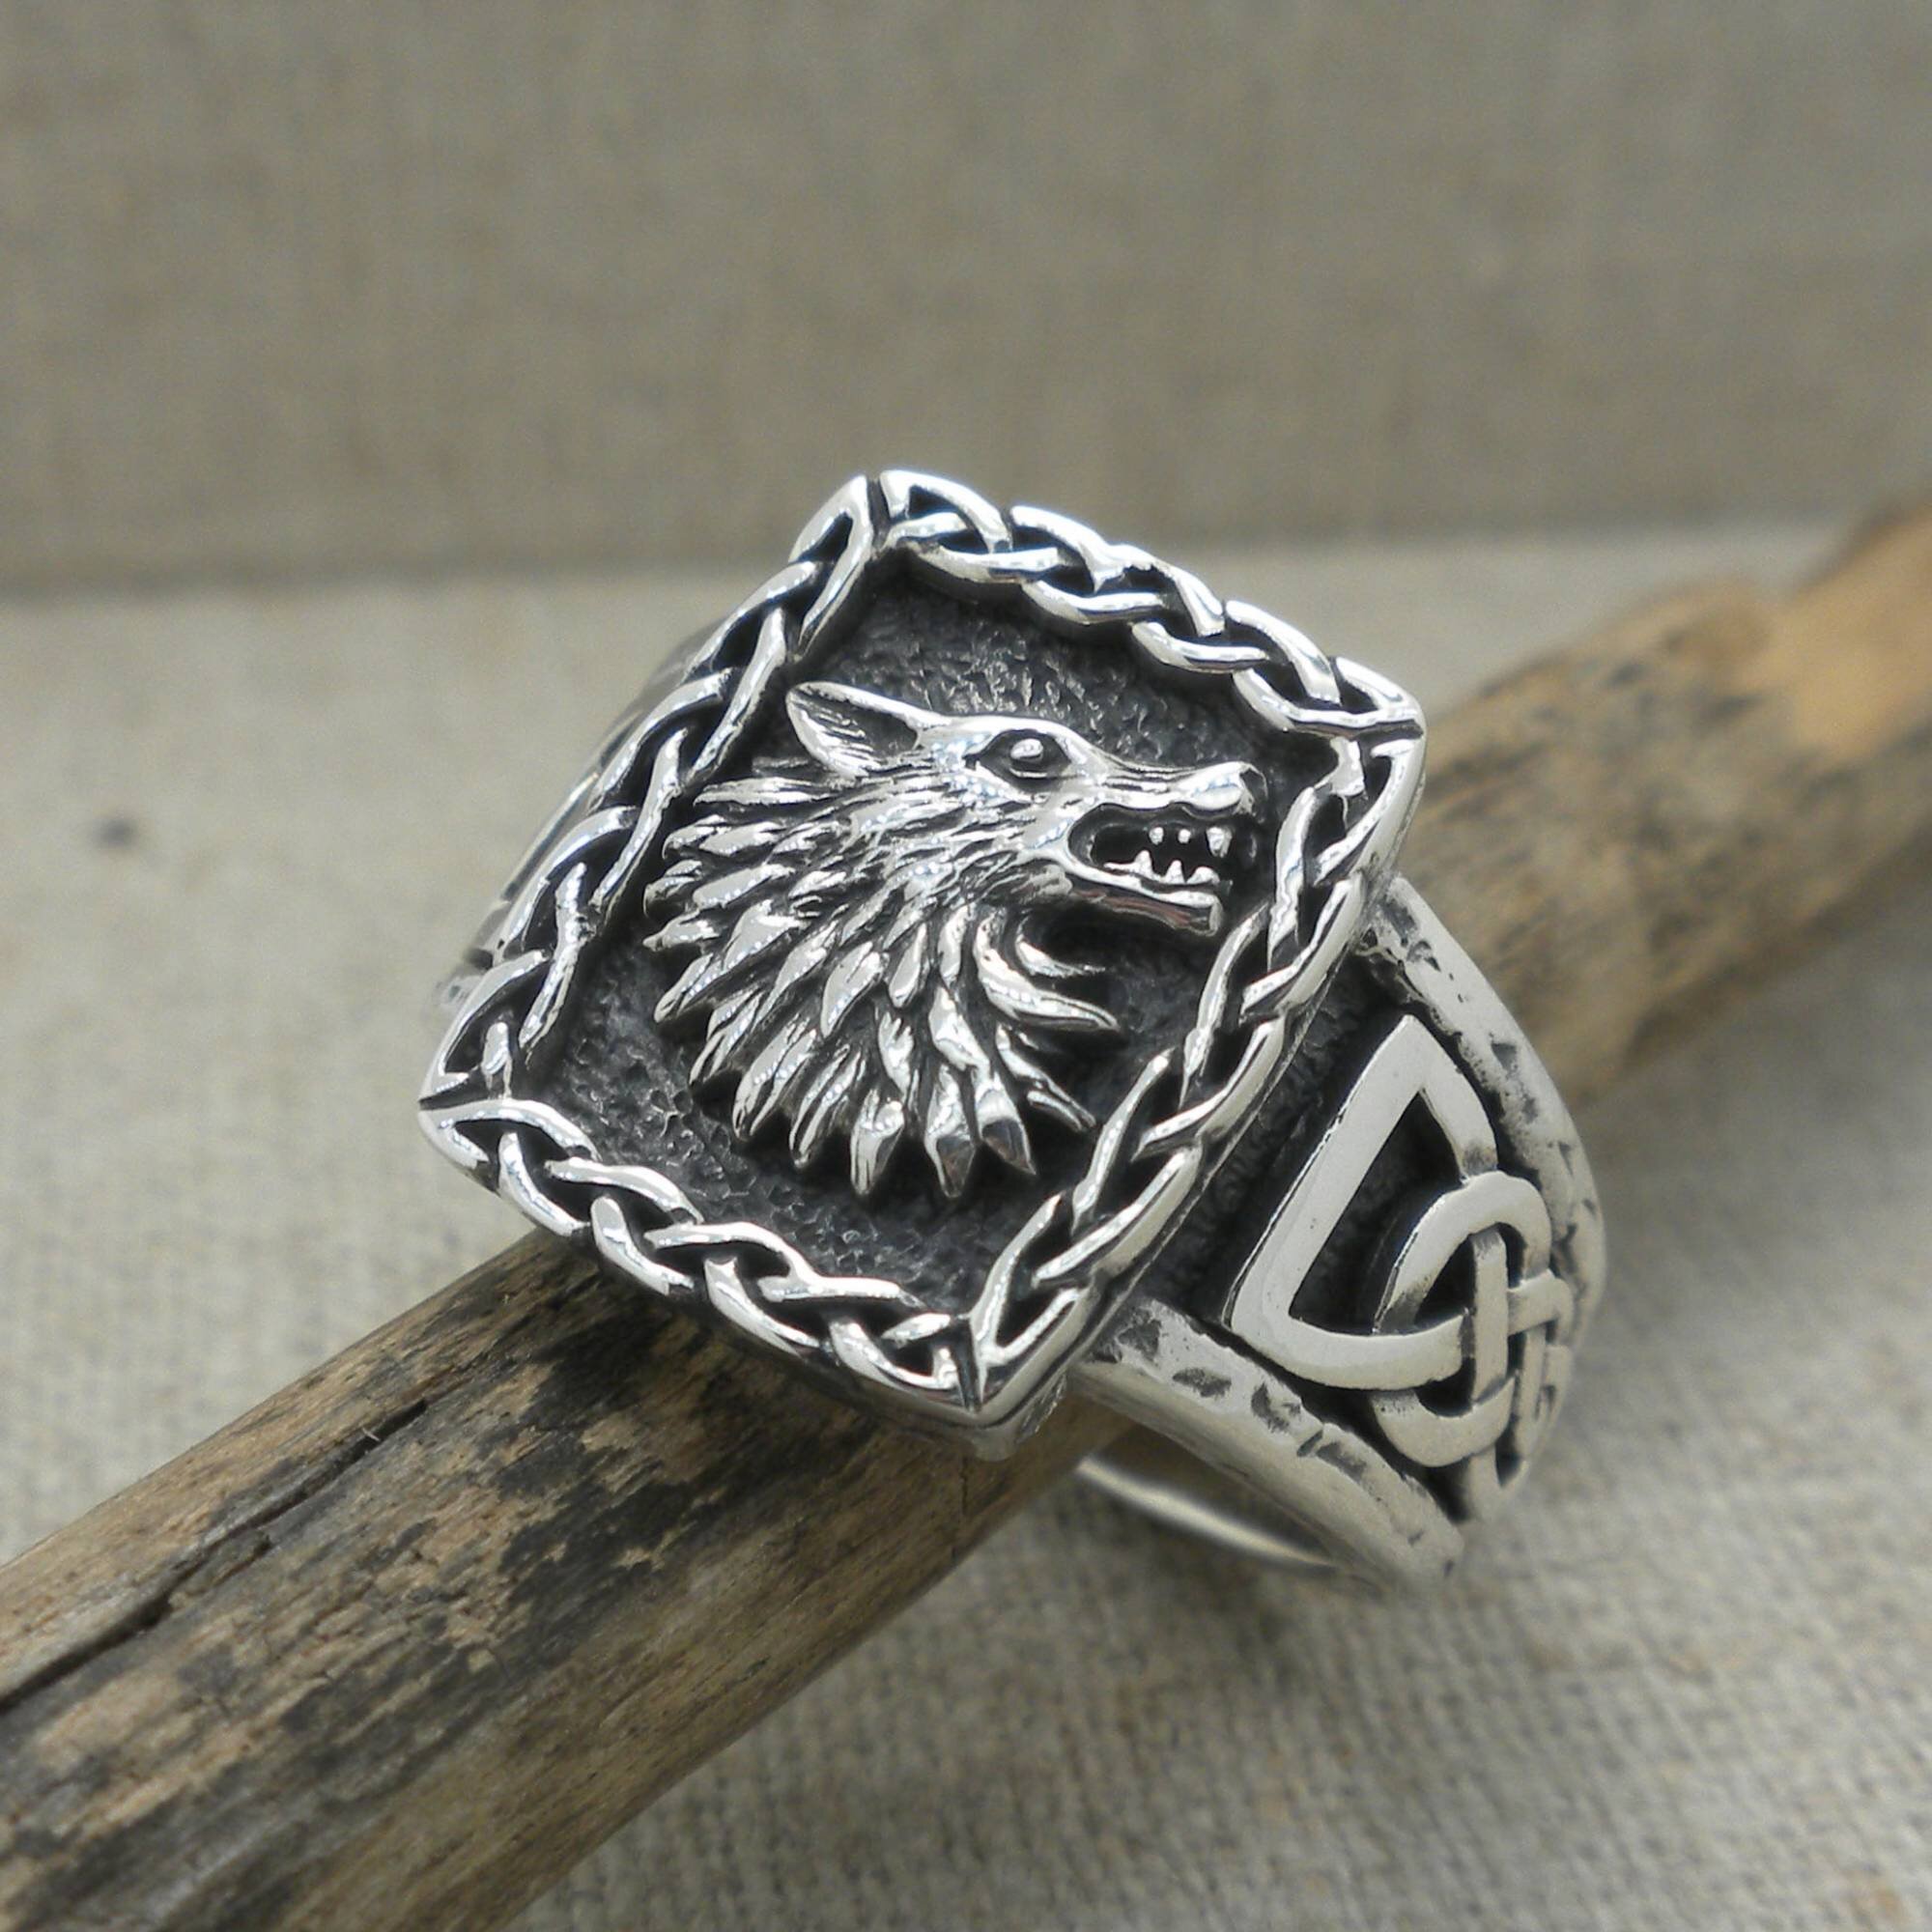 Keith Jack Wolf Ring with Celtic Accents